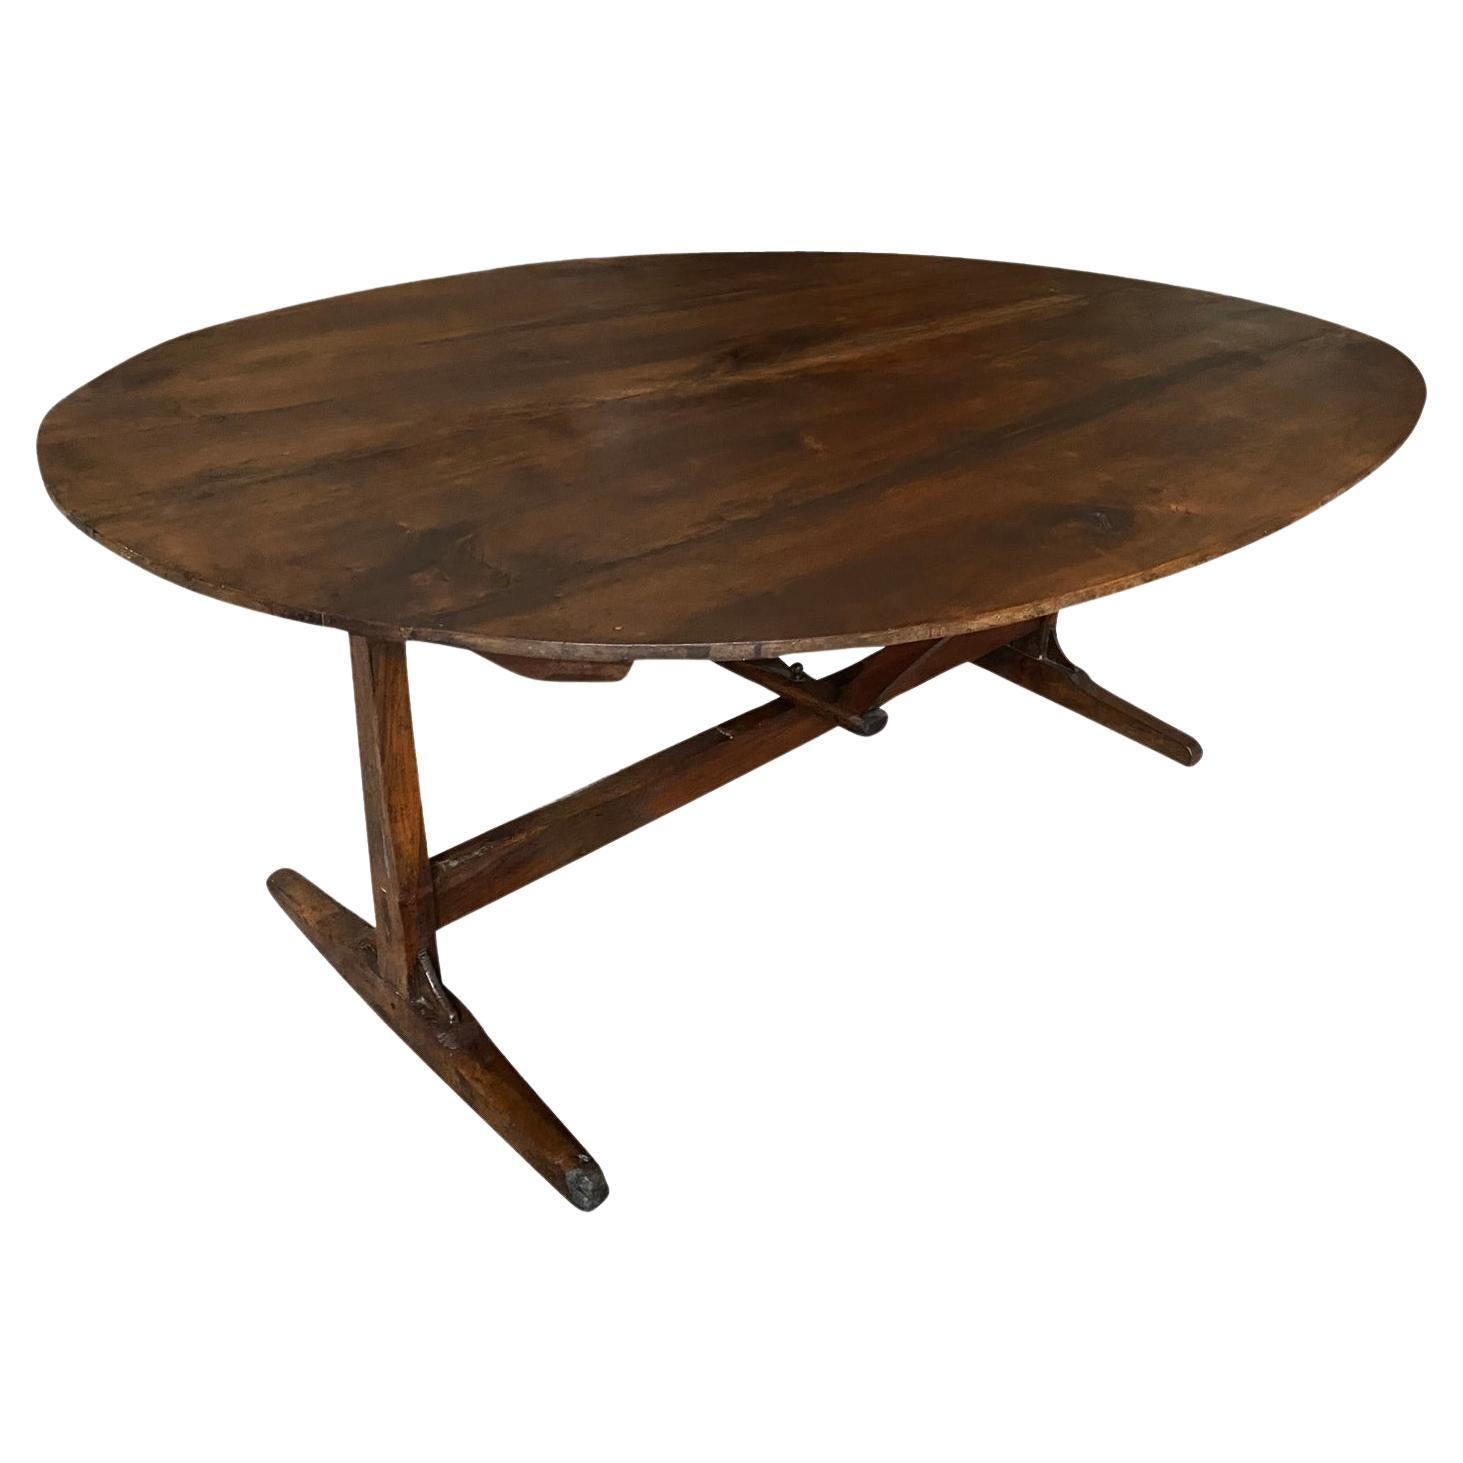 French Mid-19th Century Oval Wine Tasting Table For Sale